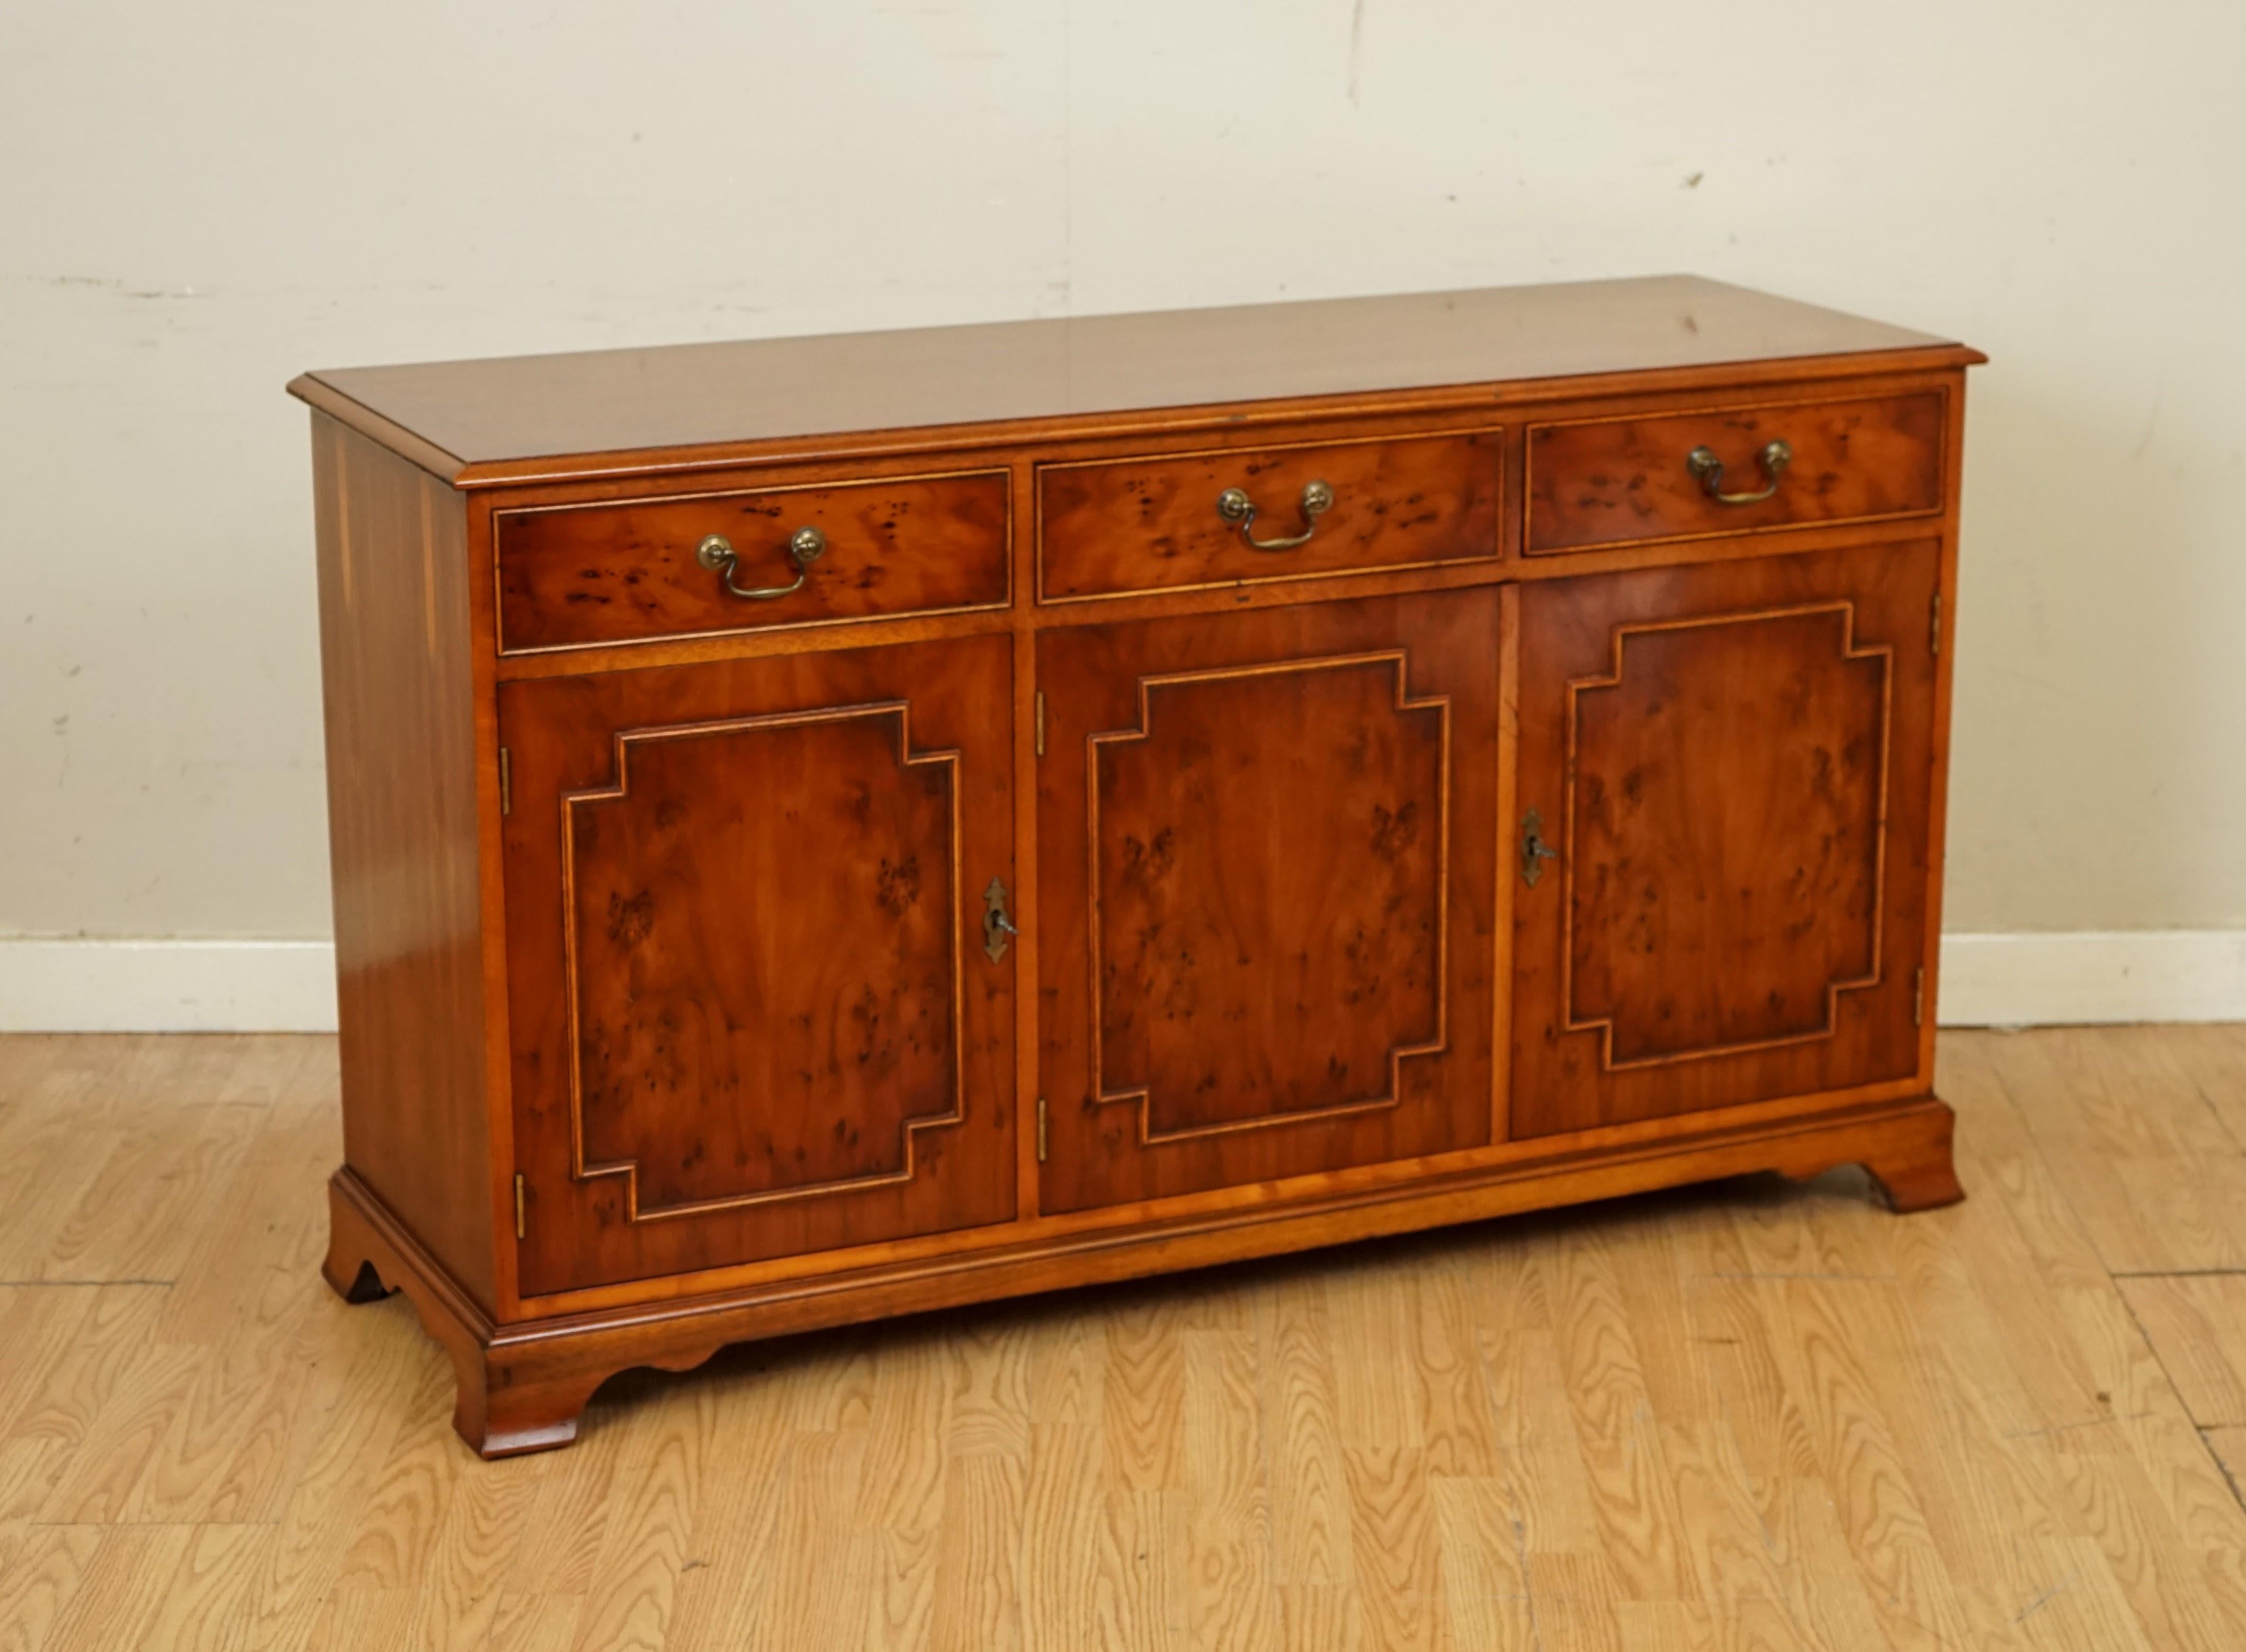 We are so excited to present to you this Stunning Made in England Bradley Burr Yew wood sideboard.

We have lightly restored this by giving it a hand clean all over, hand waxed and hand polish. 

Please carefully look at the pictures to see the